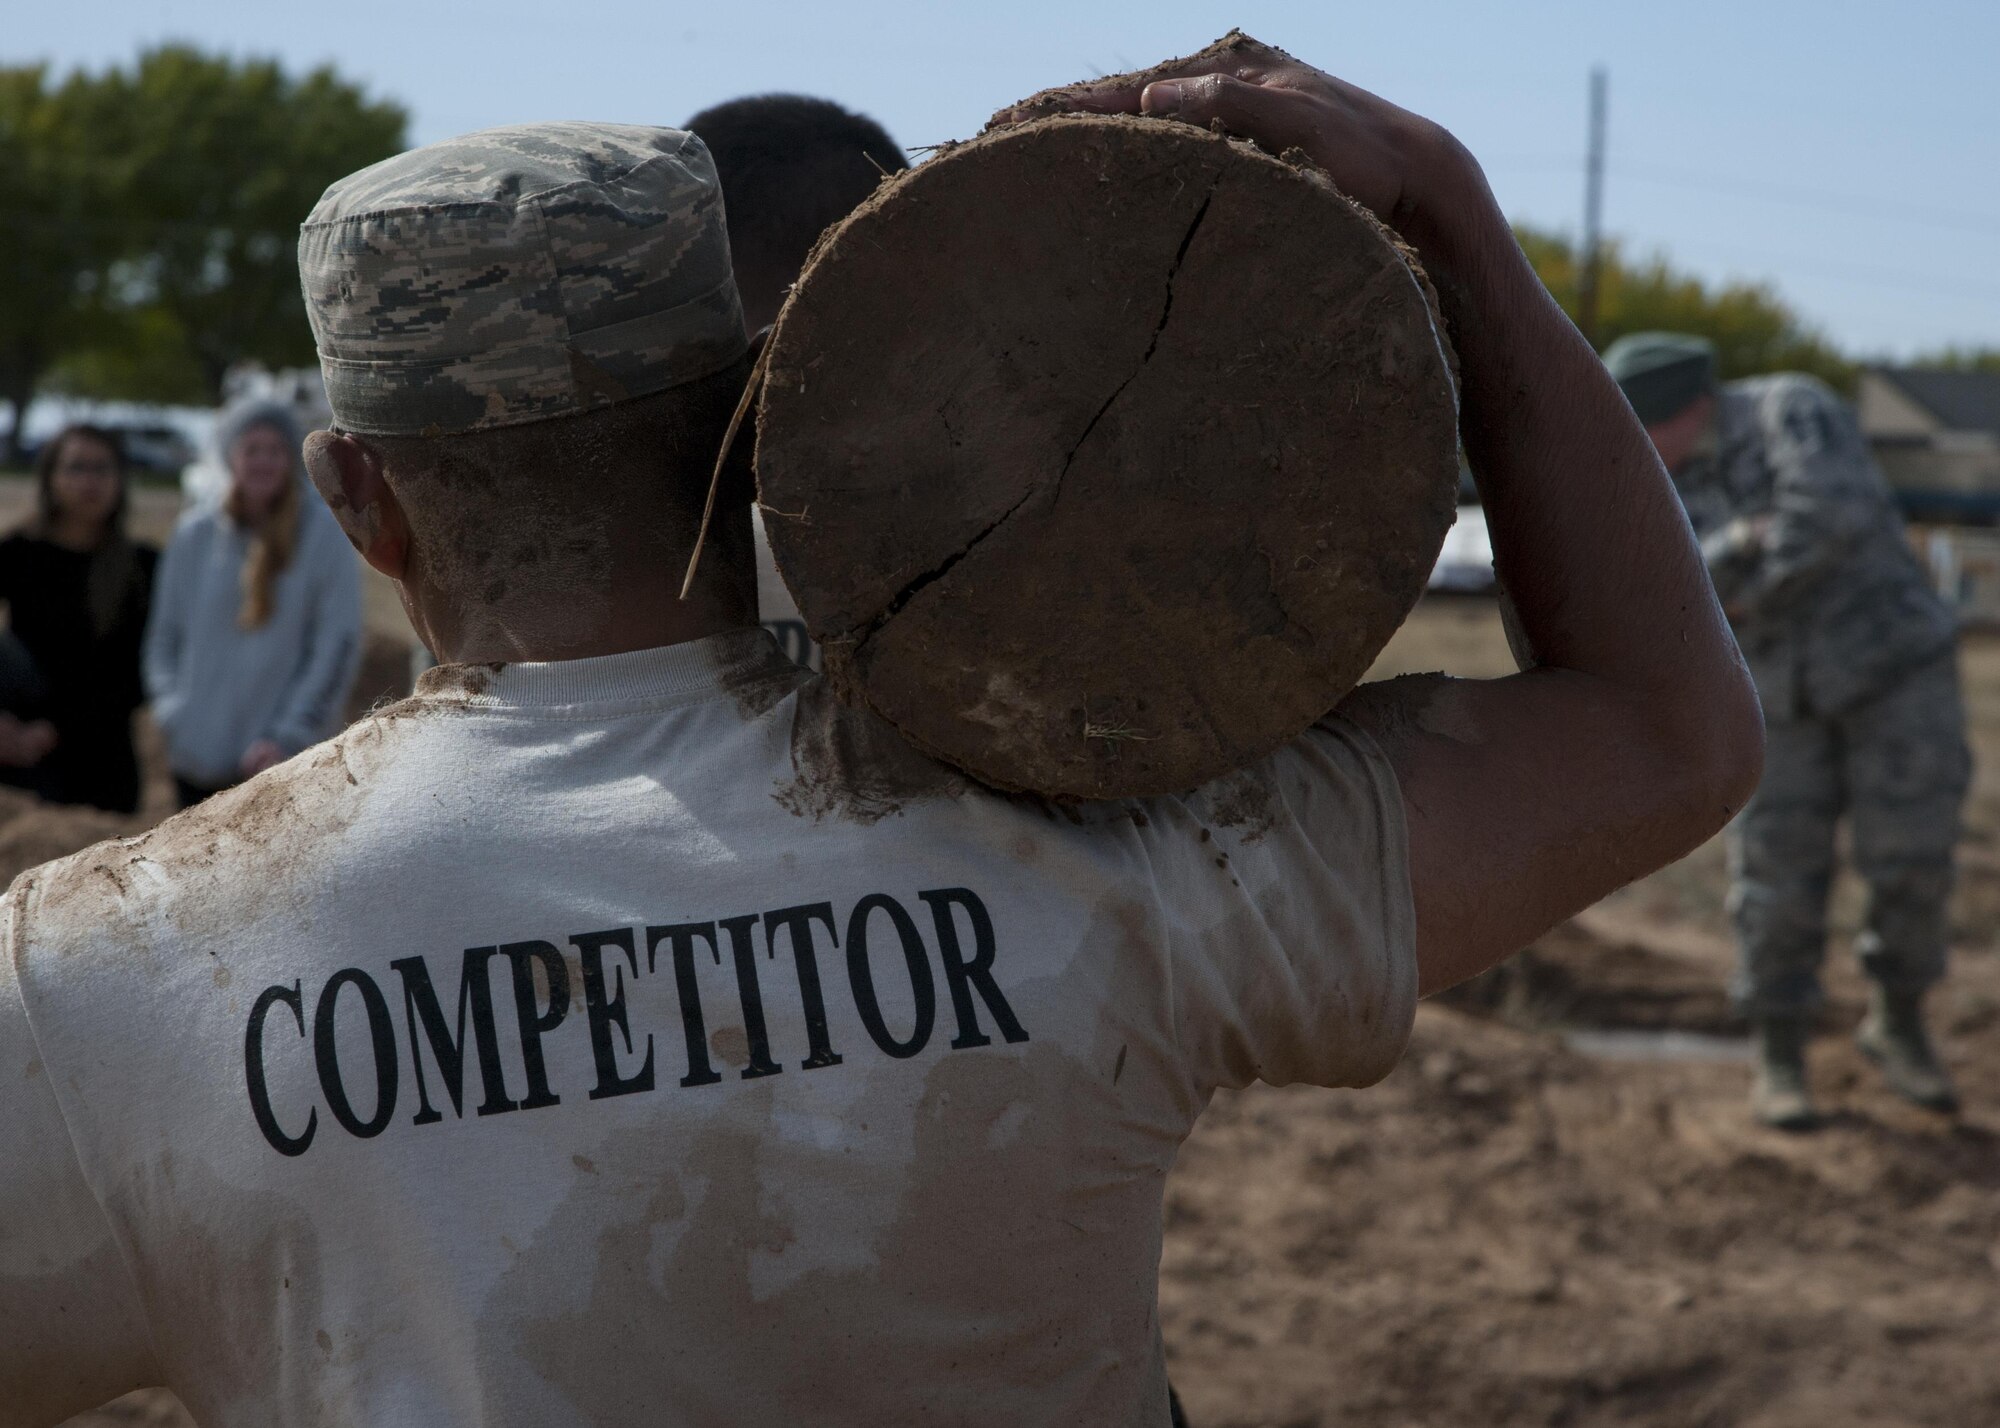 Members of the 377th Weapons Systems Security Squadron carry a log during the “Team Punisher” portion of the Manzano Challenge at Kirtland Air Force Base, N.M., Oct. 27. The competition featured Airmen from across the 377th Security Forces Group divided into teams of four to compete on 13 stations. (U.S. Air Force photo by Staff Sgt. J.D. Strong II)